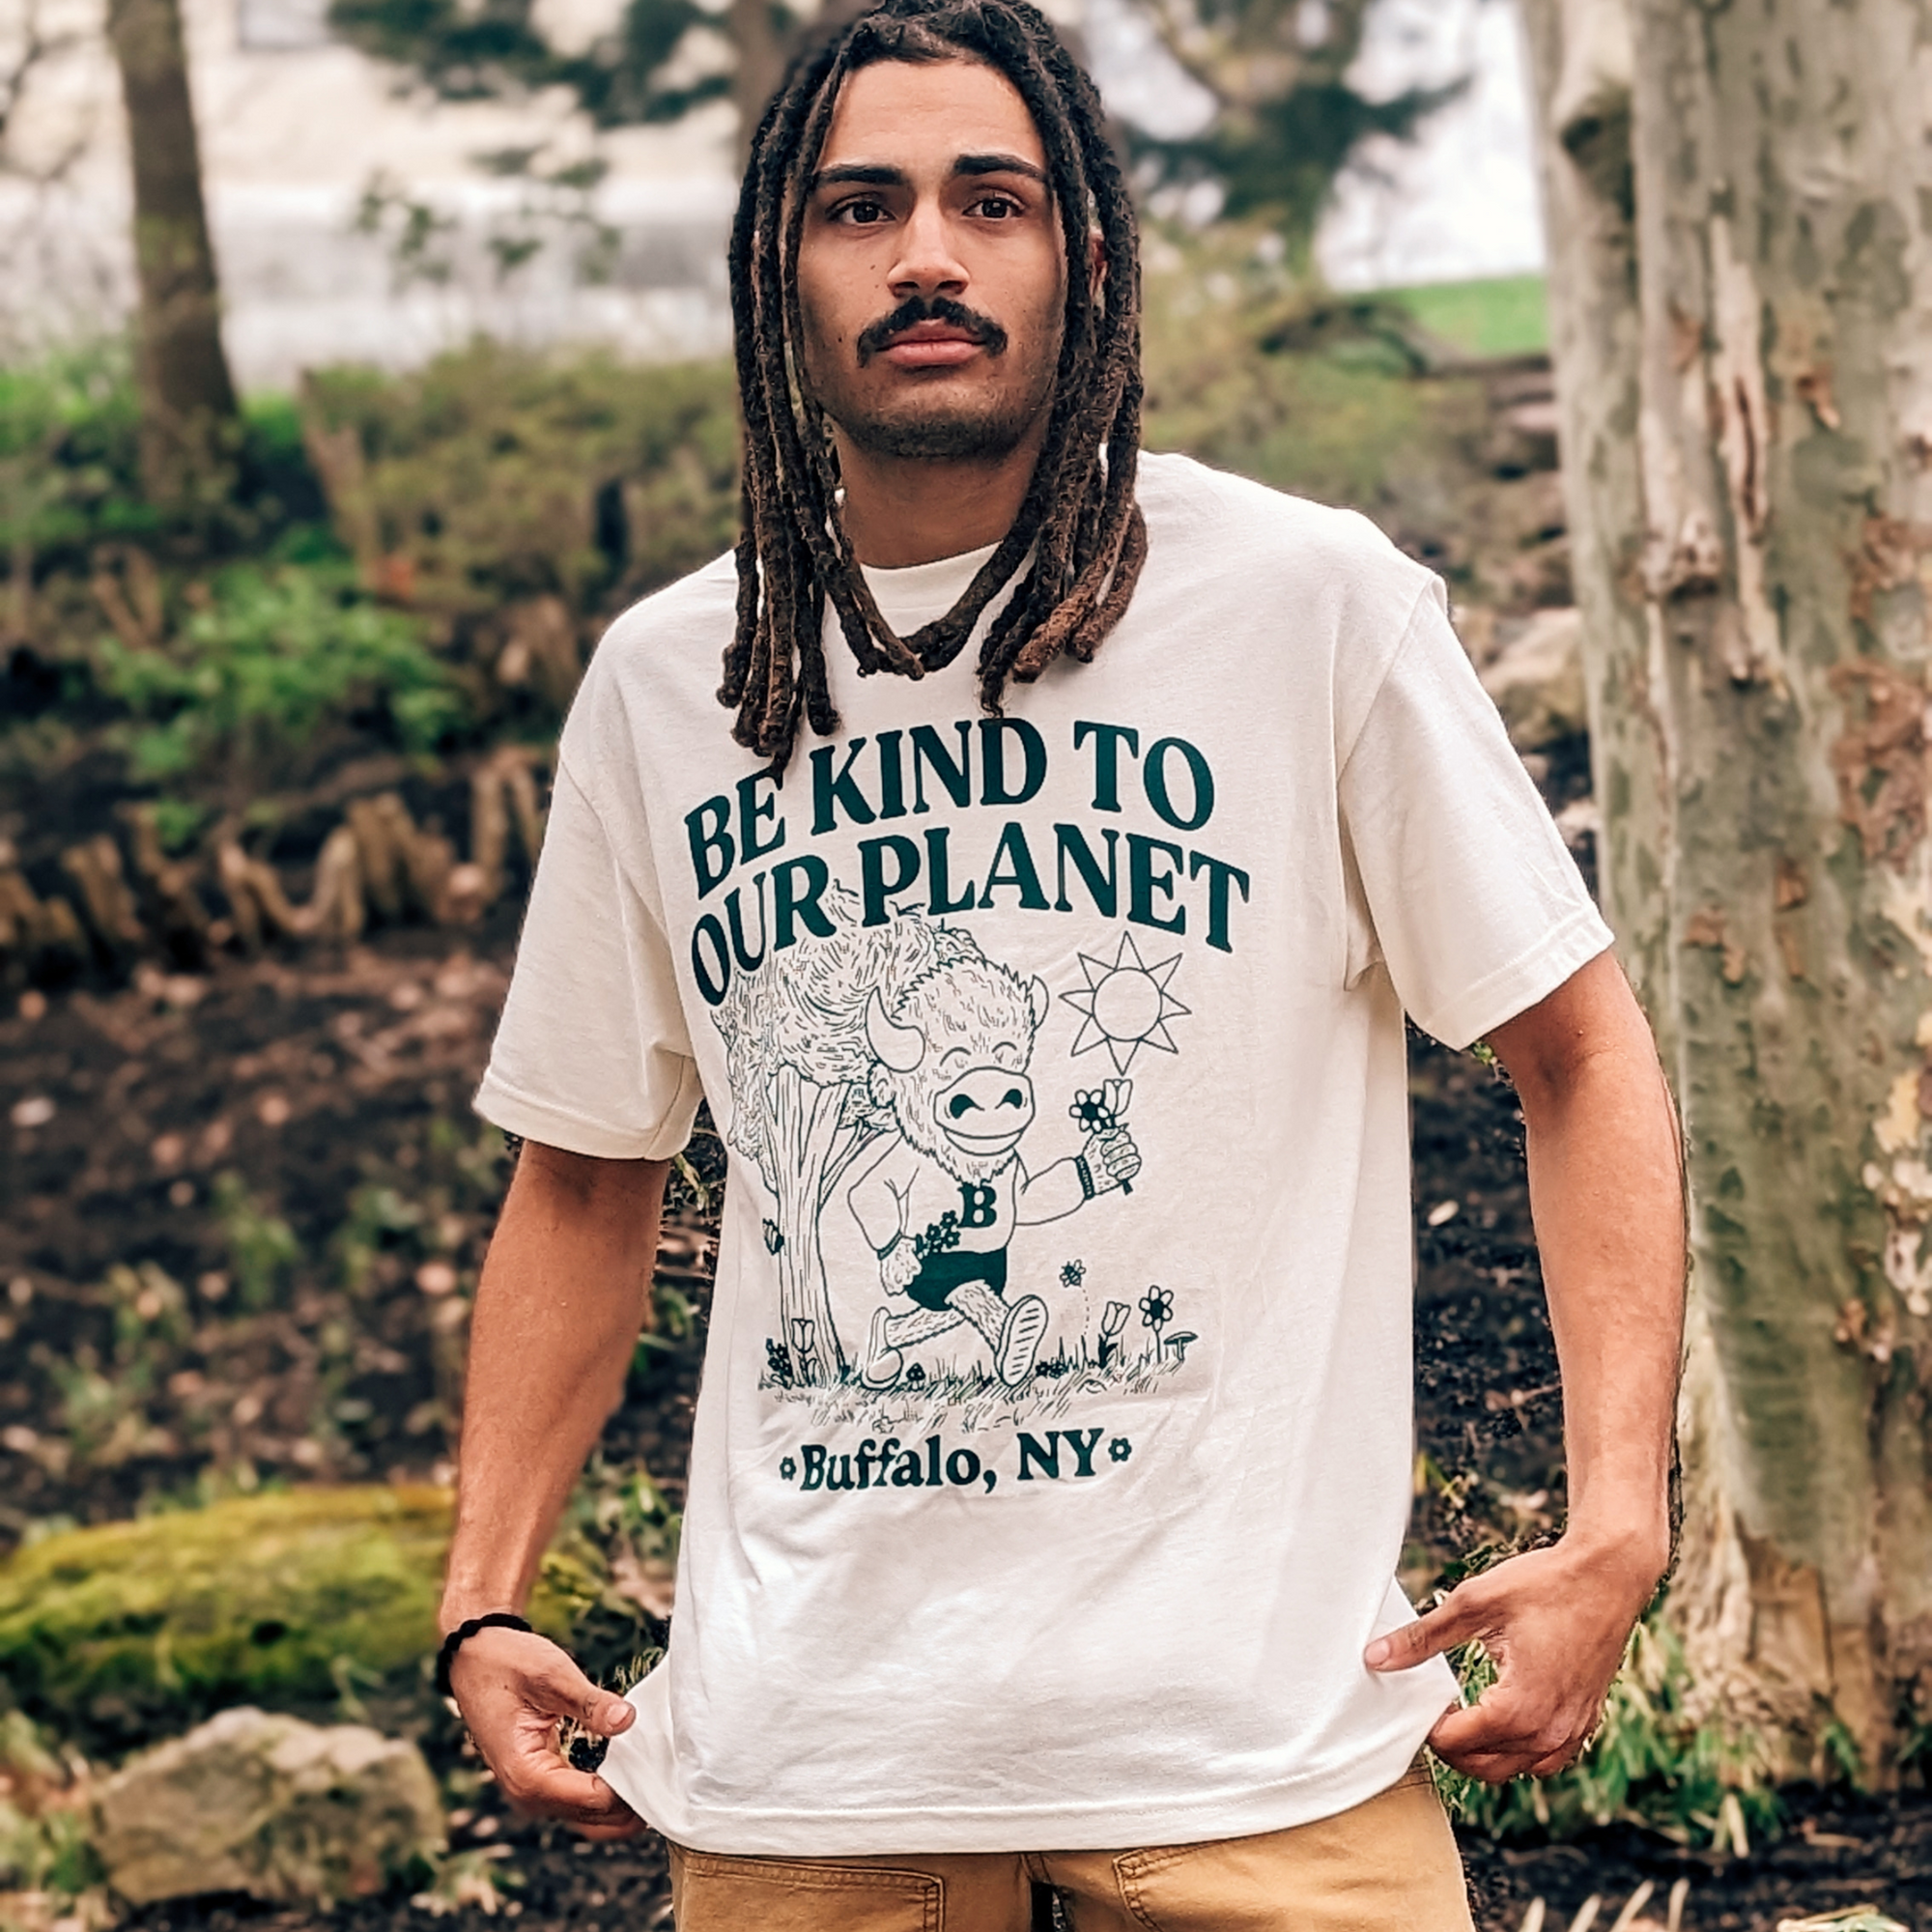 Be Kind To Our Planet Buffalo, NY Cream Short Sleeve Shirt. Shirt features a drawing of a buffalo smiling and walking through a park.